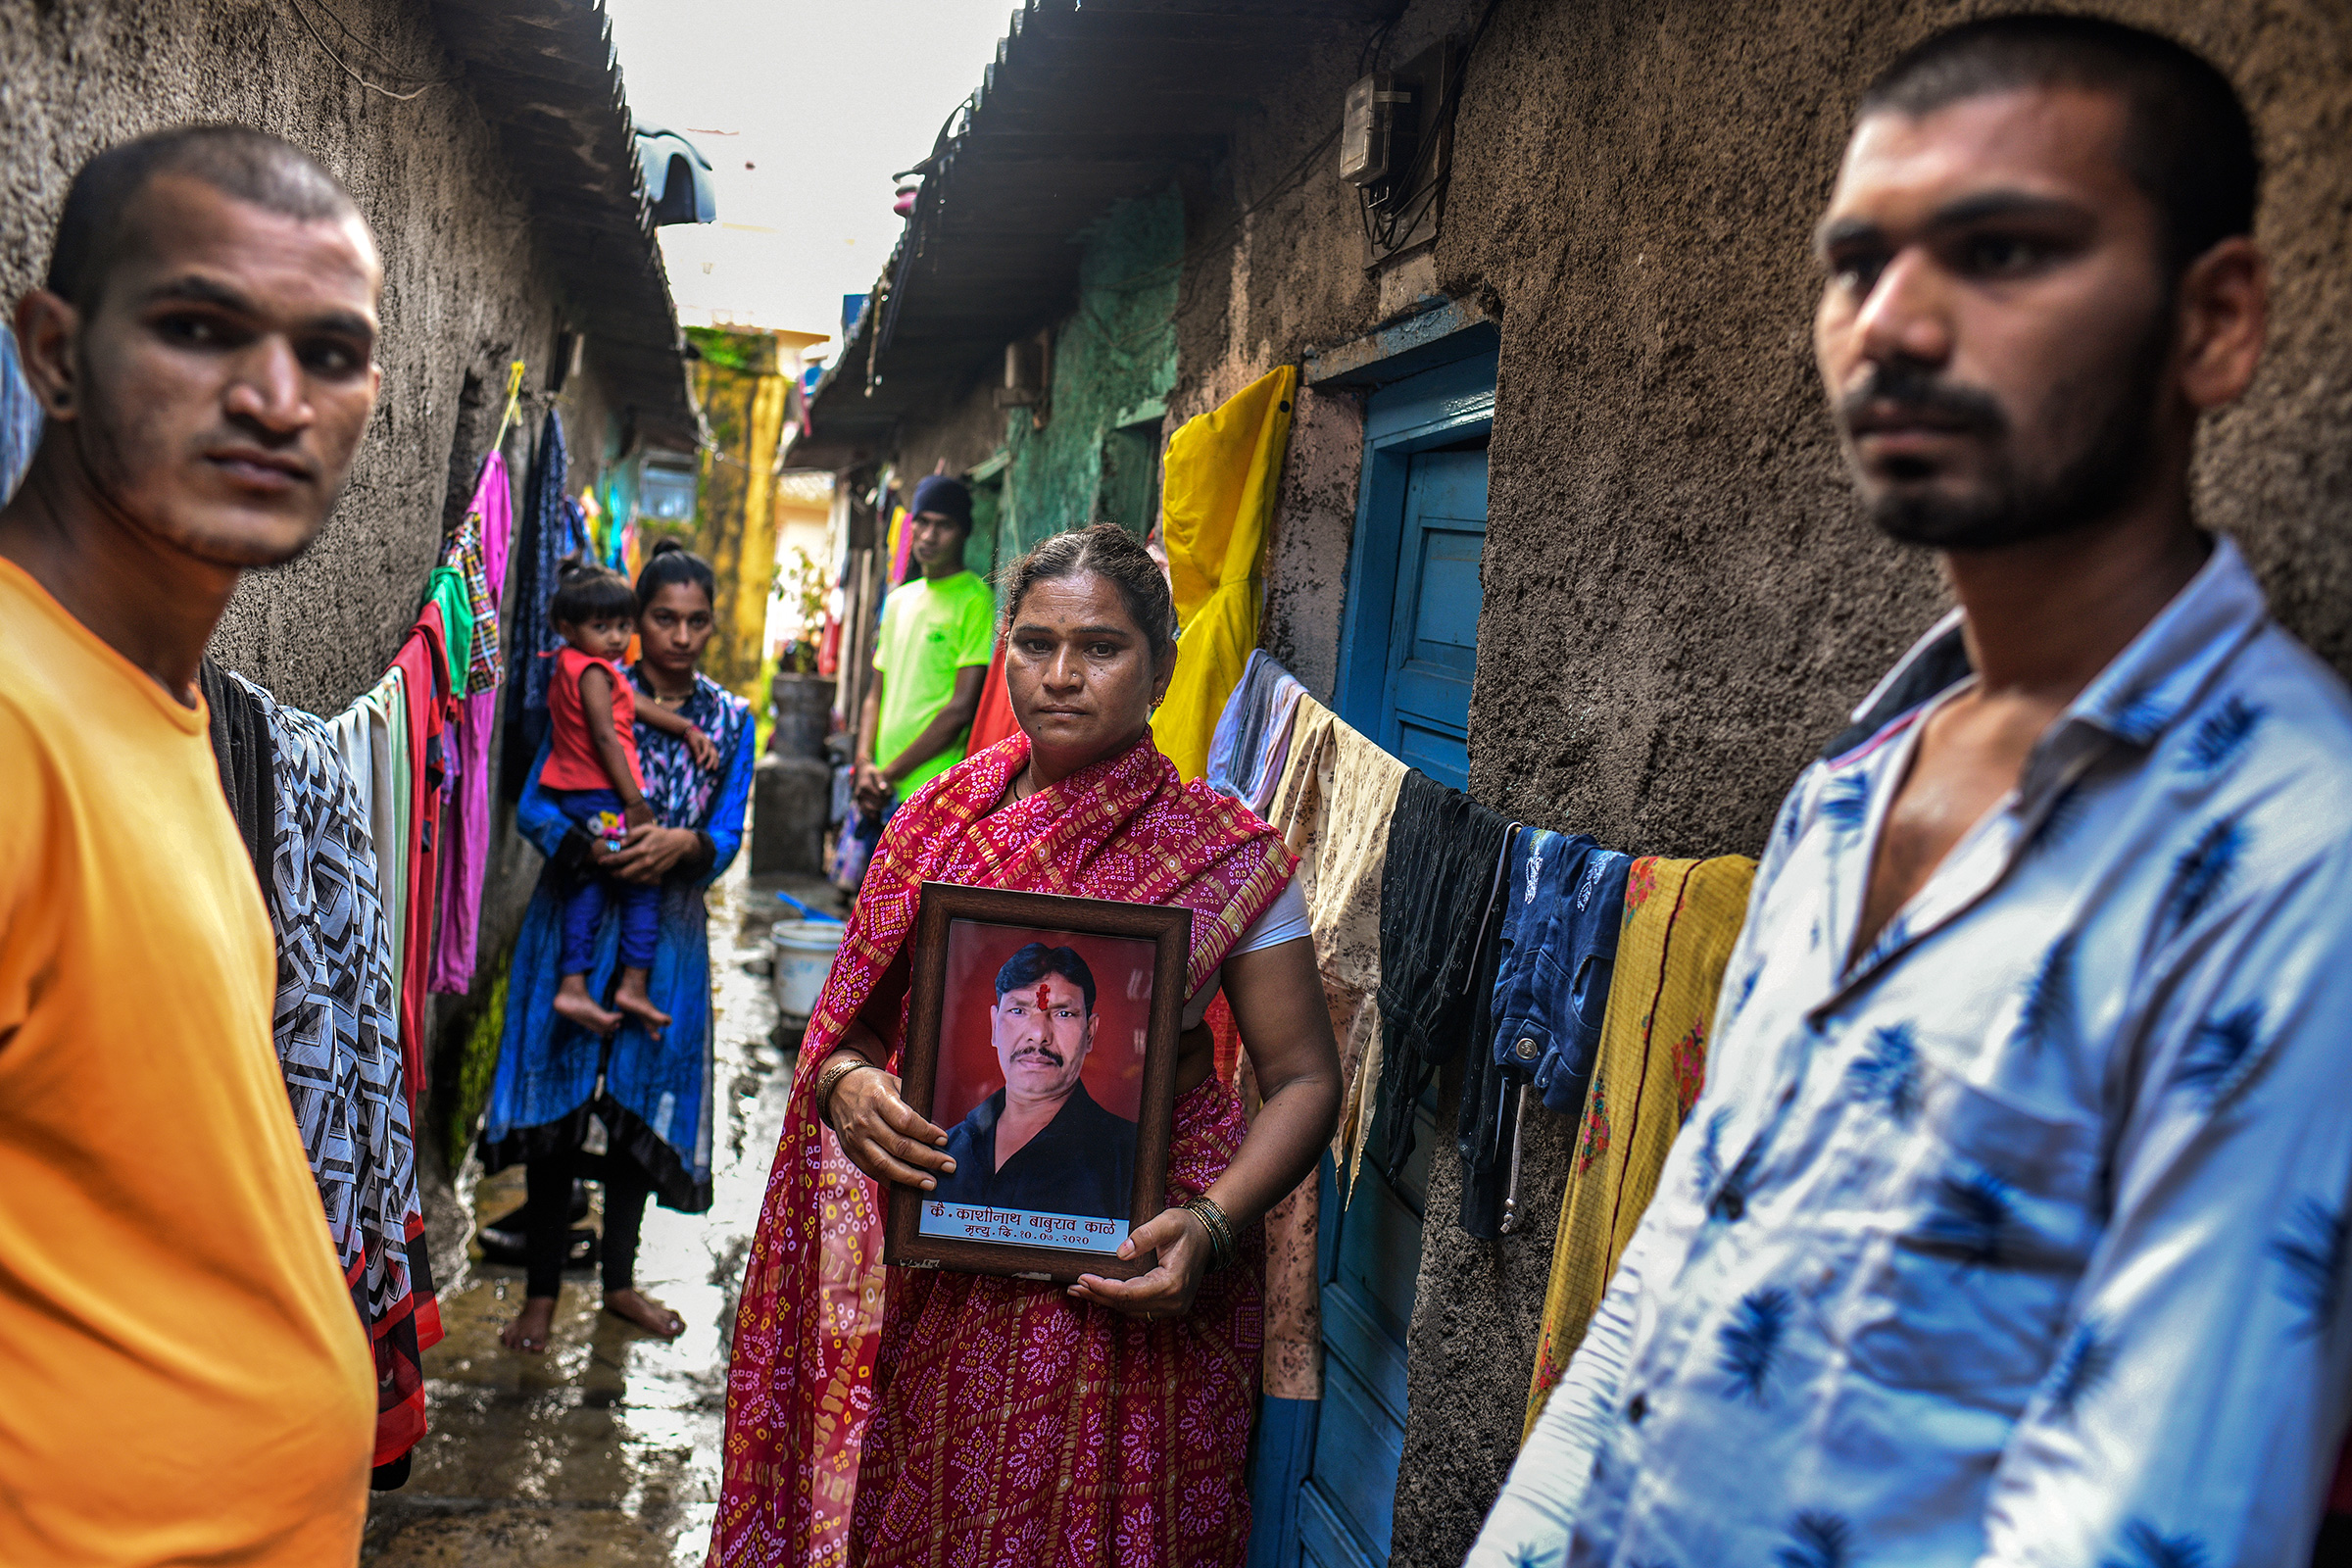 Kashinath Kale's widow, Sangeeta, flanked by her sons Akshay, left, and Avinash, holds a framed portrait of her late husband outside their home in Kalewadi, a suburb of Pune. Kale, 44, died from COVID-19 in July as the family desperately tried to find a hospital bed with a ventilator.